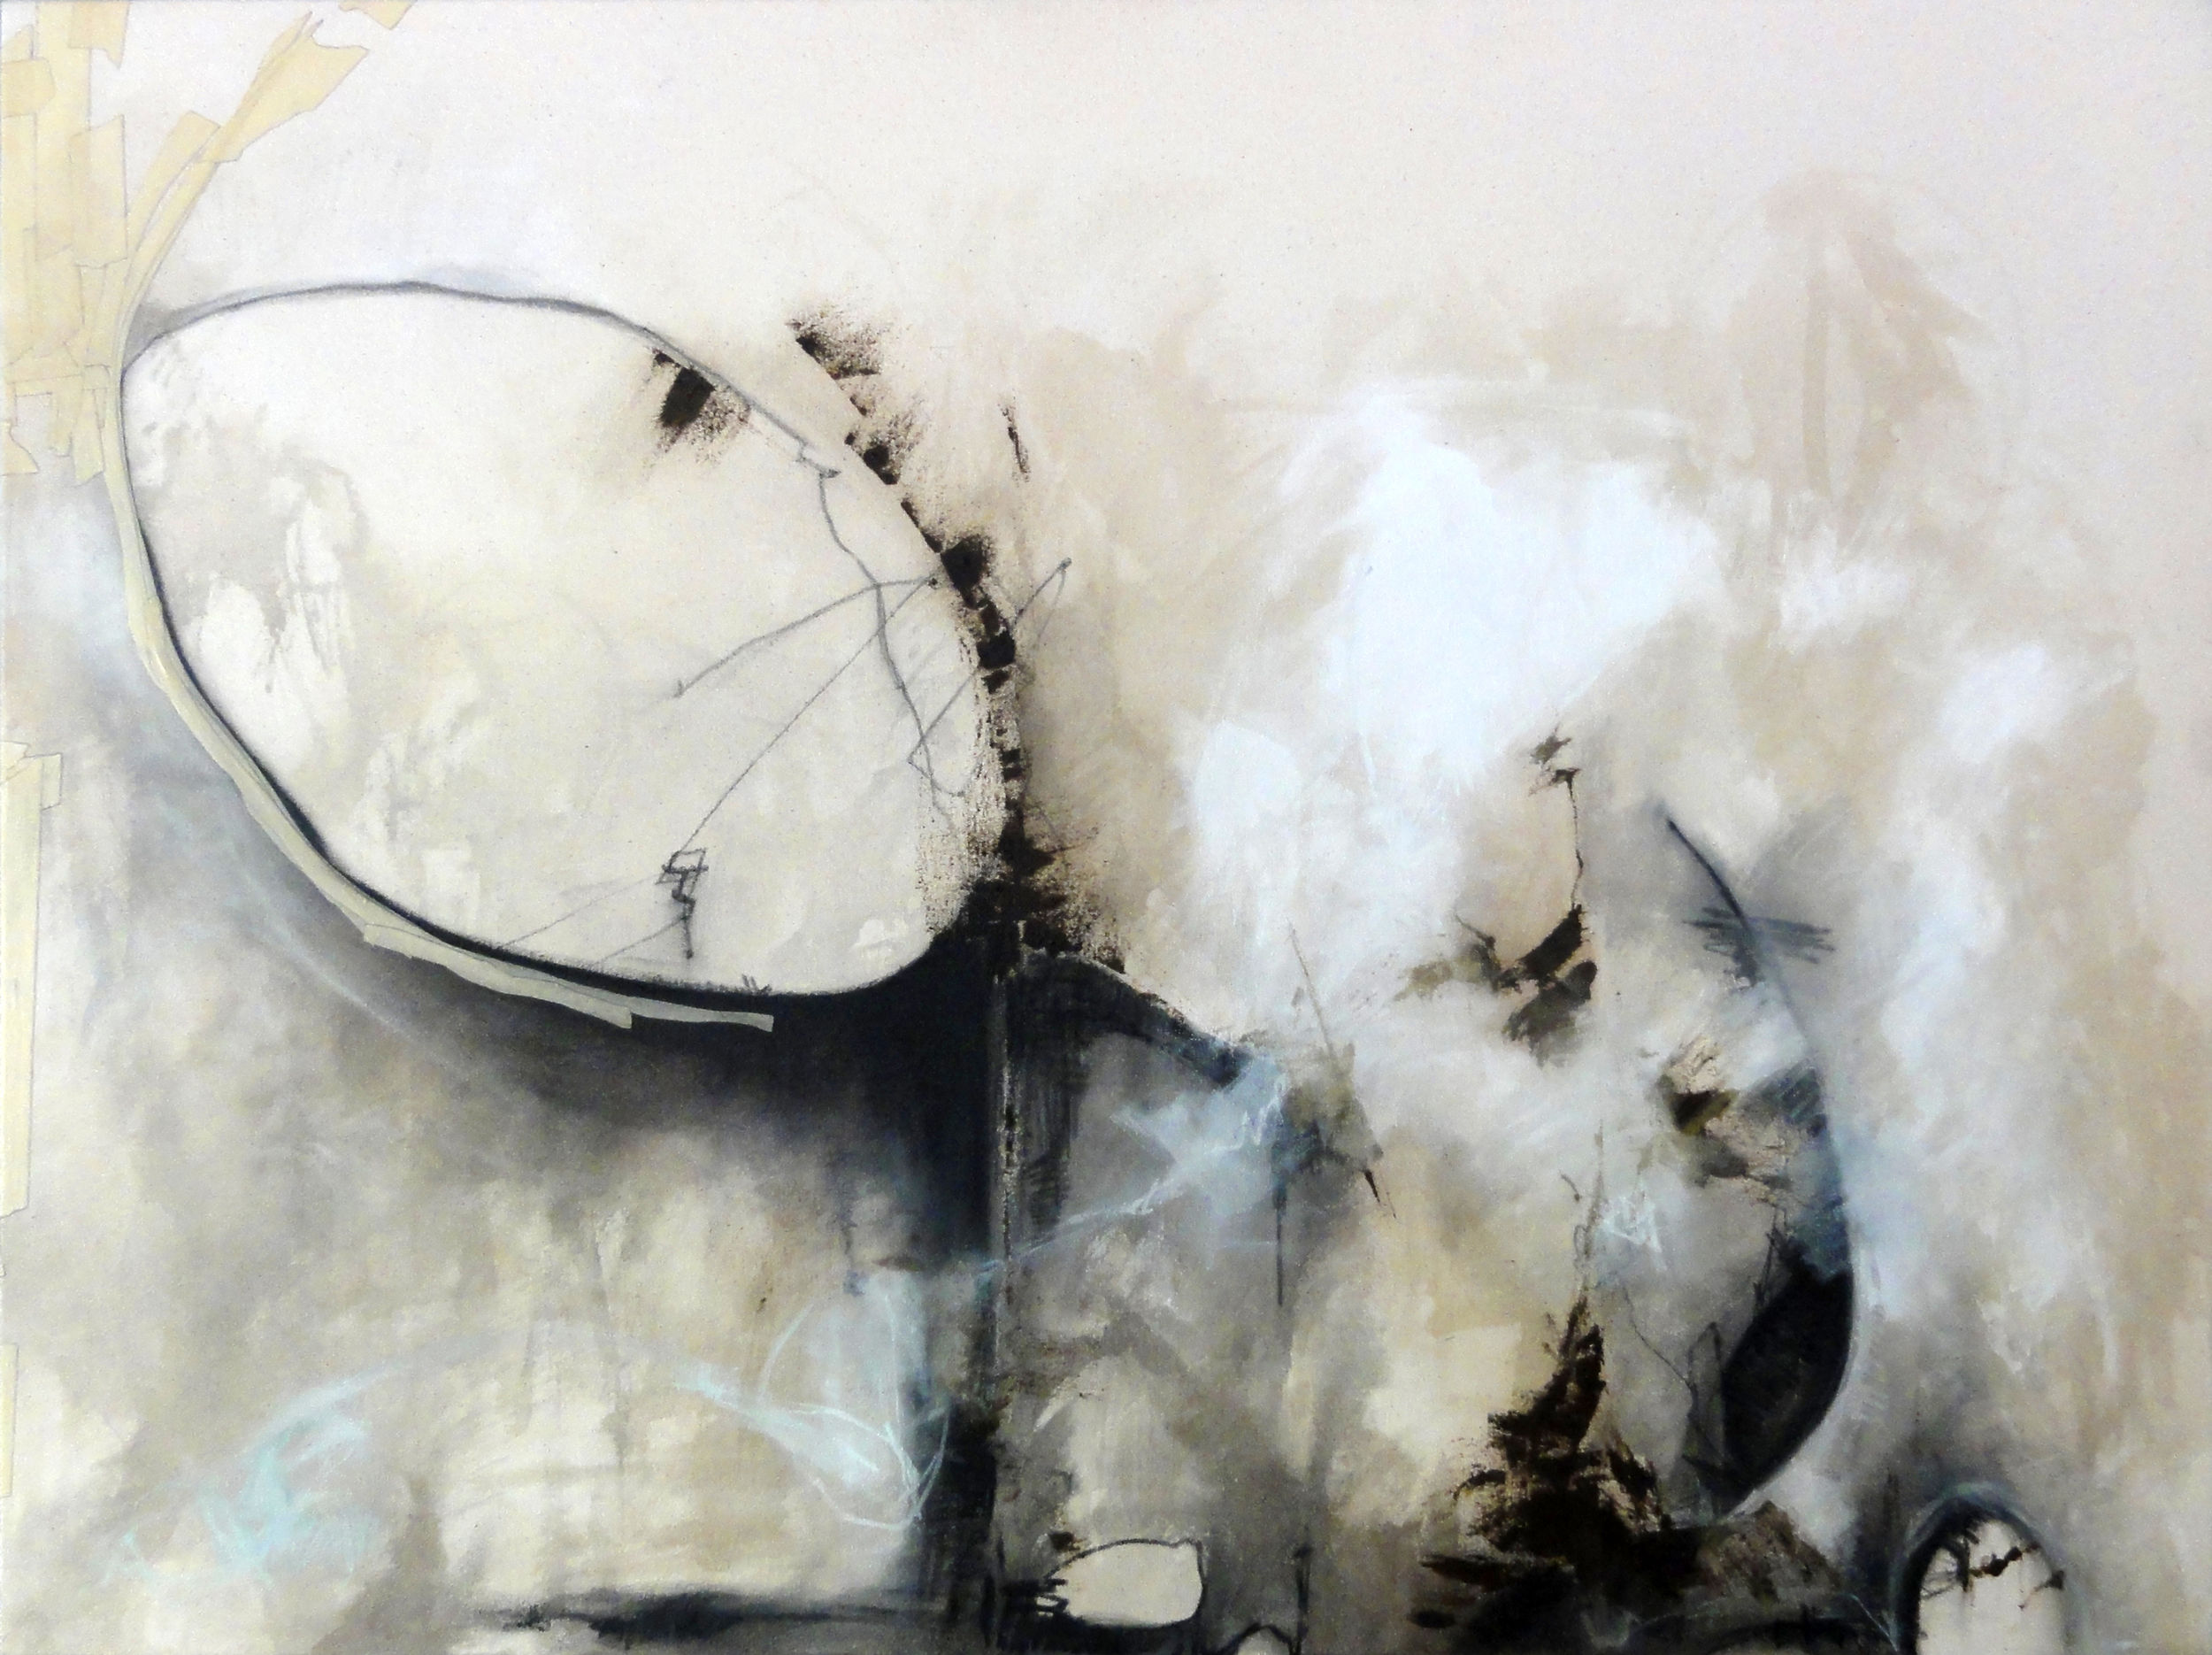 Tightrope: Acrylic, graphite, charcoal, masking tape, tar on canvas. 30" x 40" (2nd place at the VAE 2012 N.E.W Show)